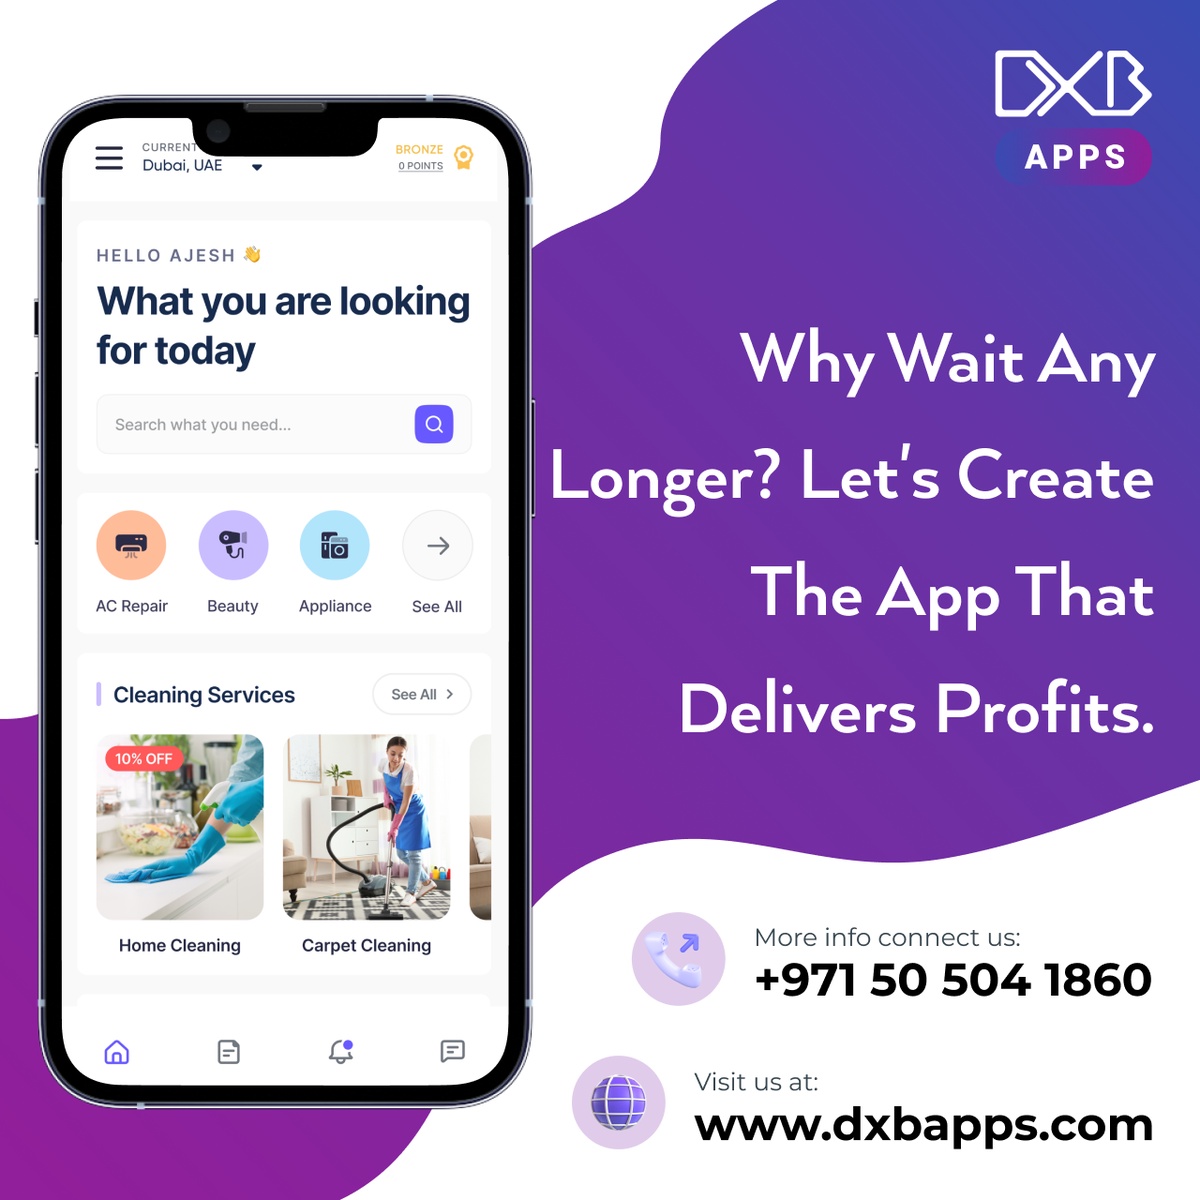 Hire DXB APPS -Best App Developers For Startup Abu Dhabi